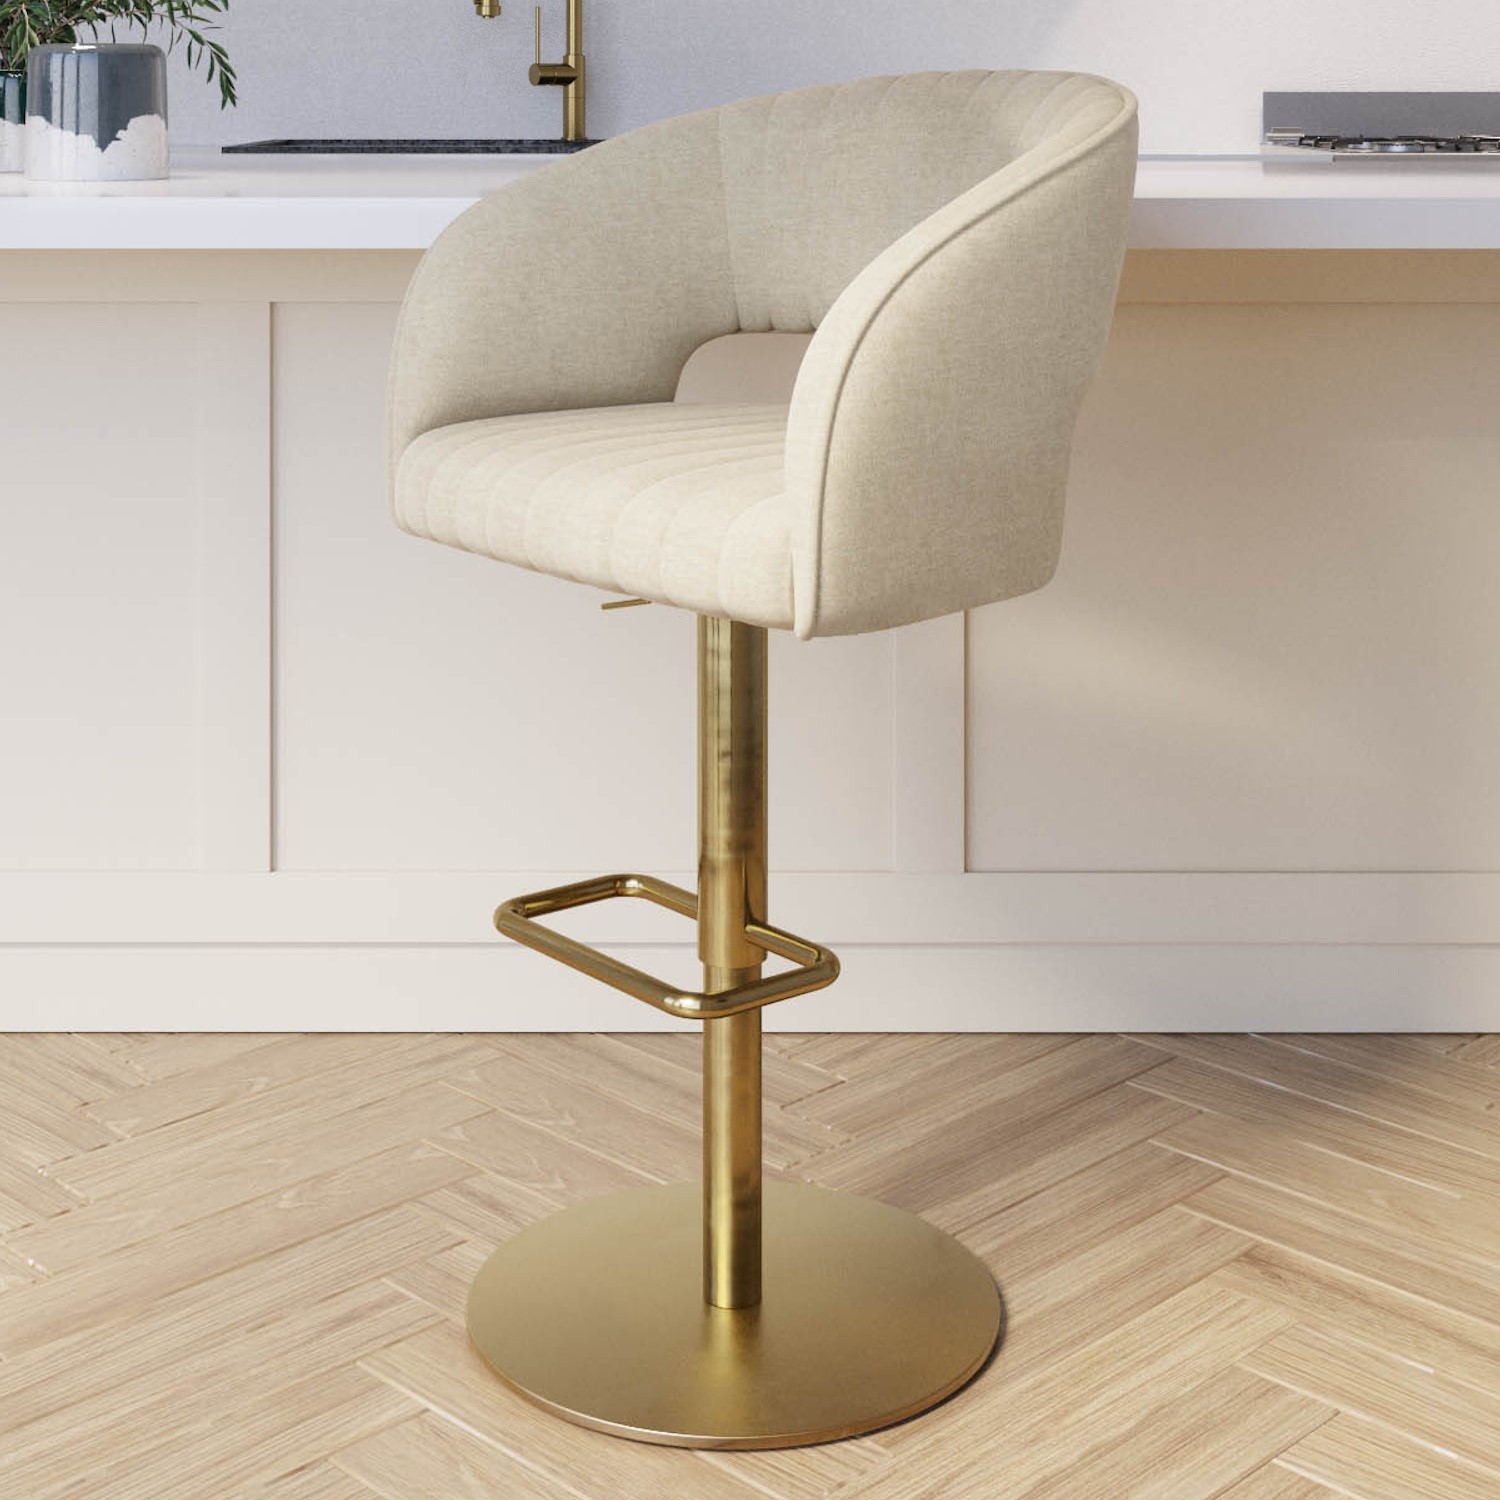 Photo of Curved beige fabric adjustable swivel bar stool with gold base - runa